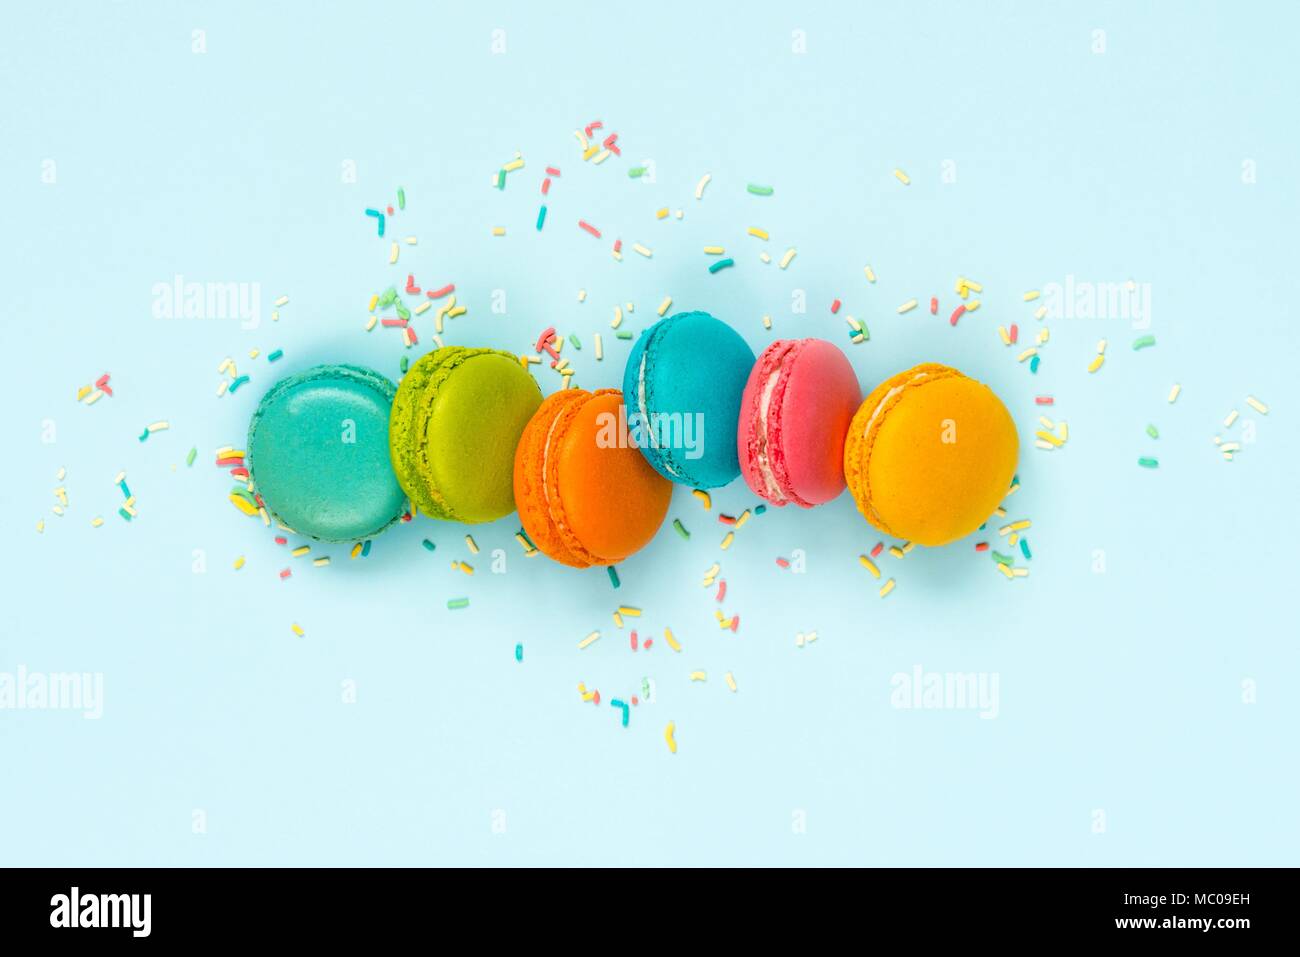 Top view of colorful macaroons and sugar sprinkles arranged over blue background. Stock Photo